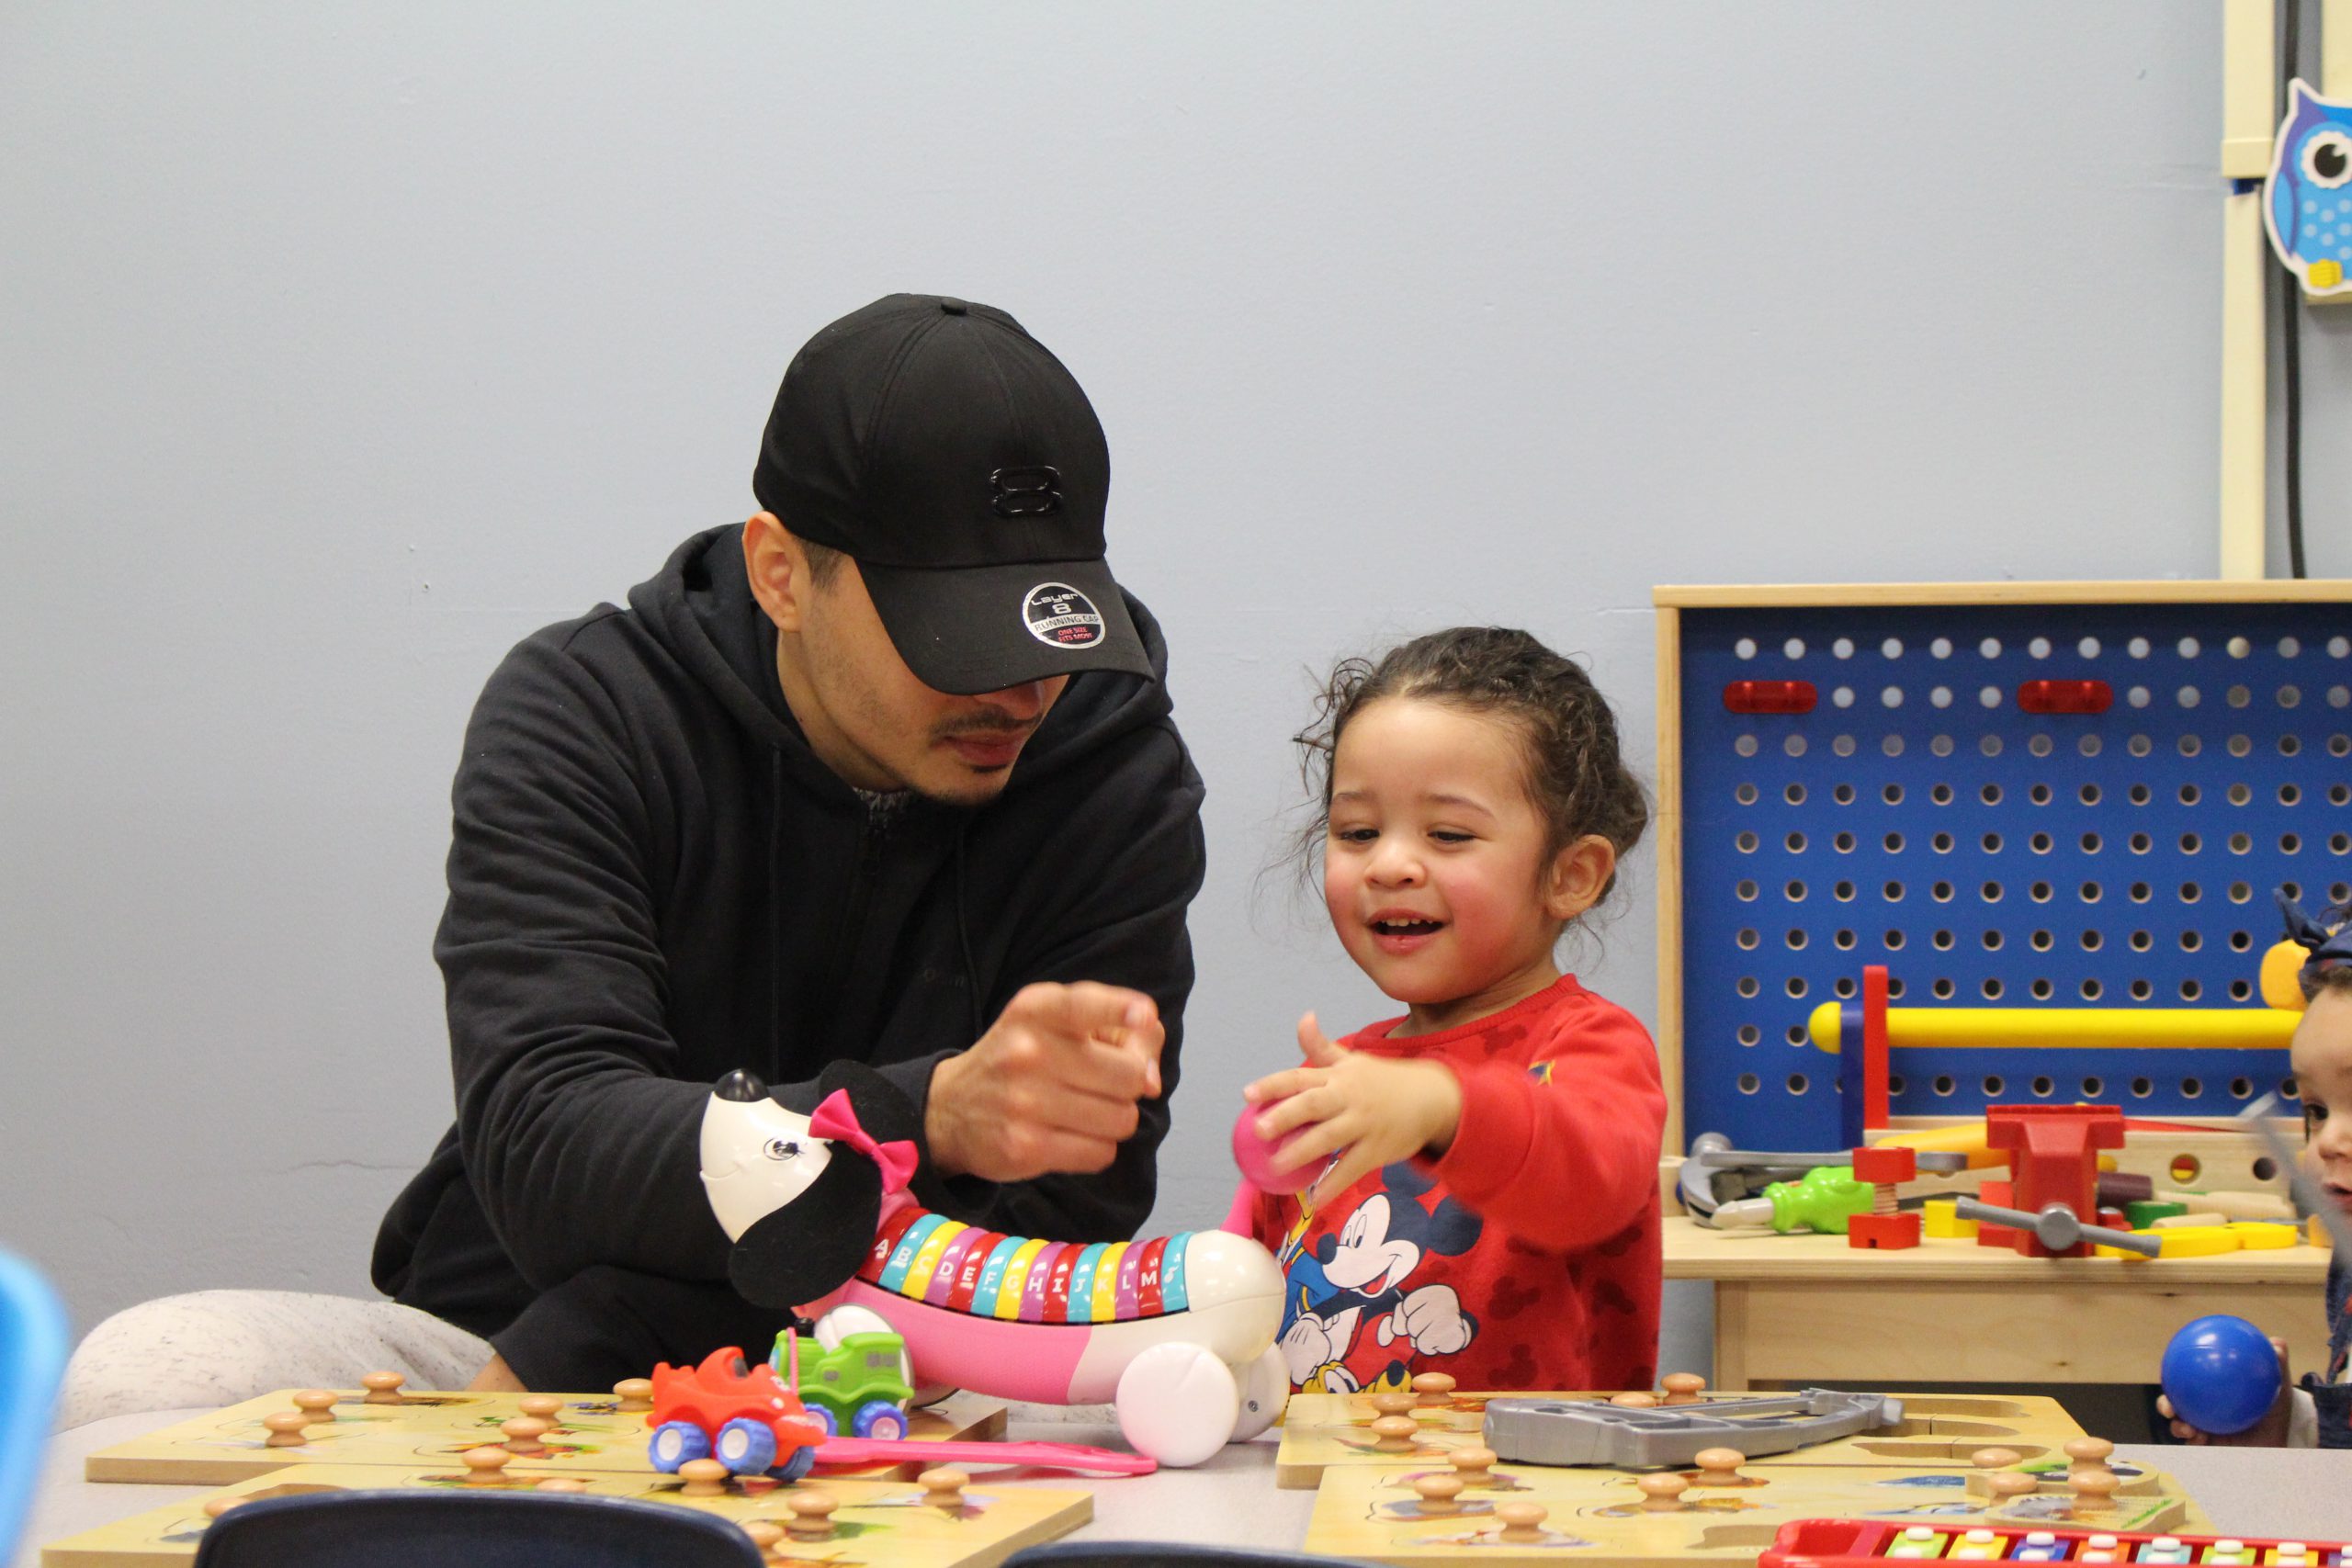 a father and child are seated at a table and playing with toys 